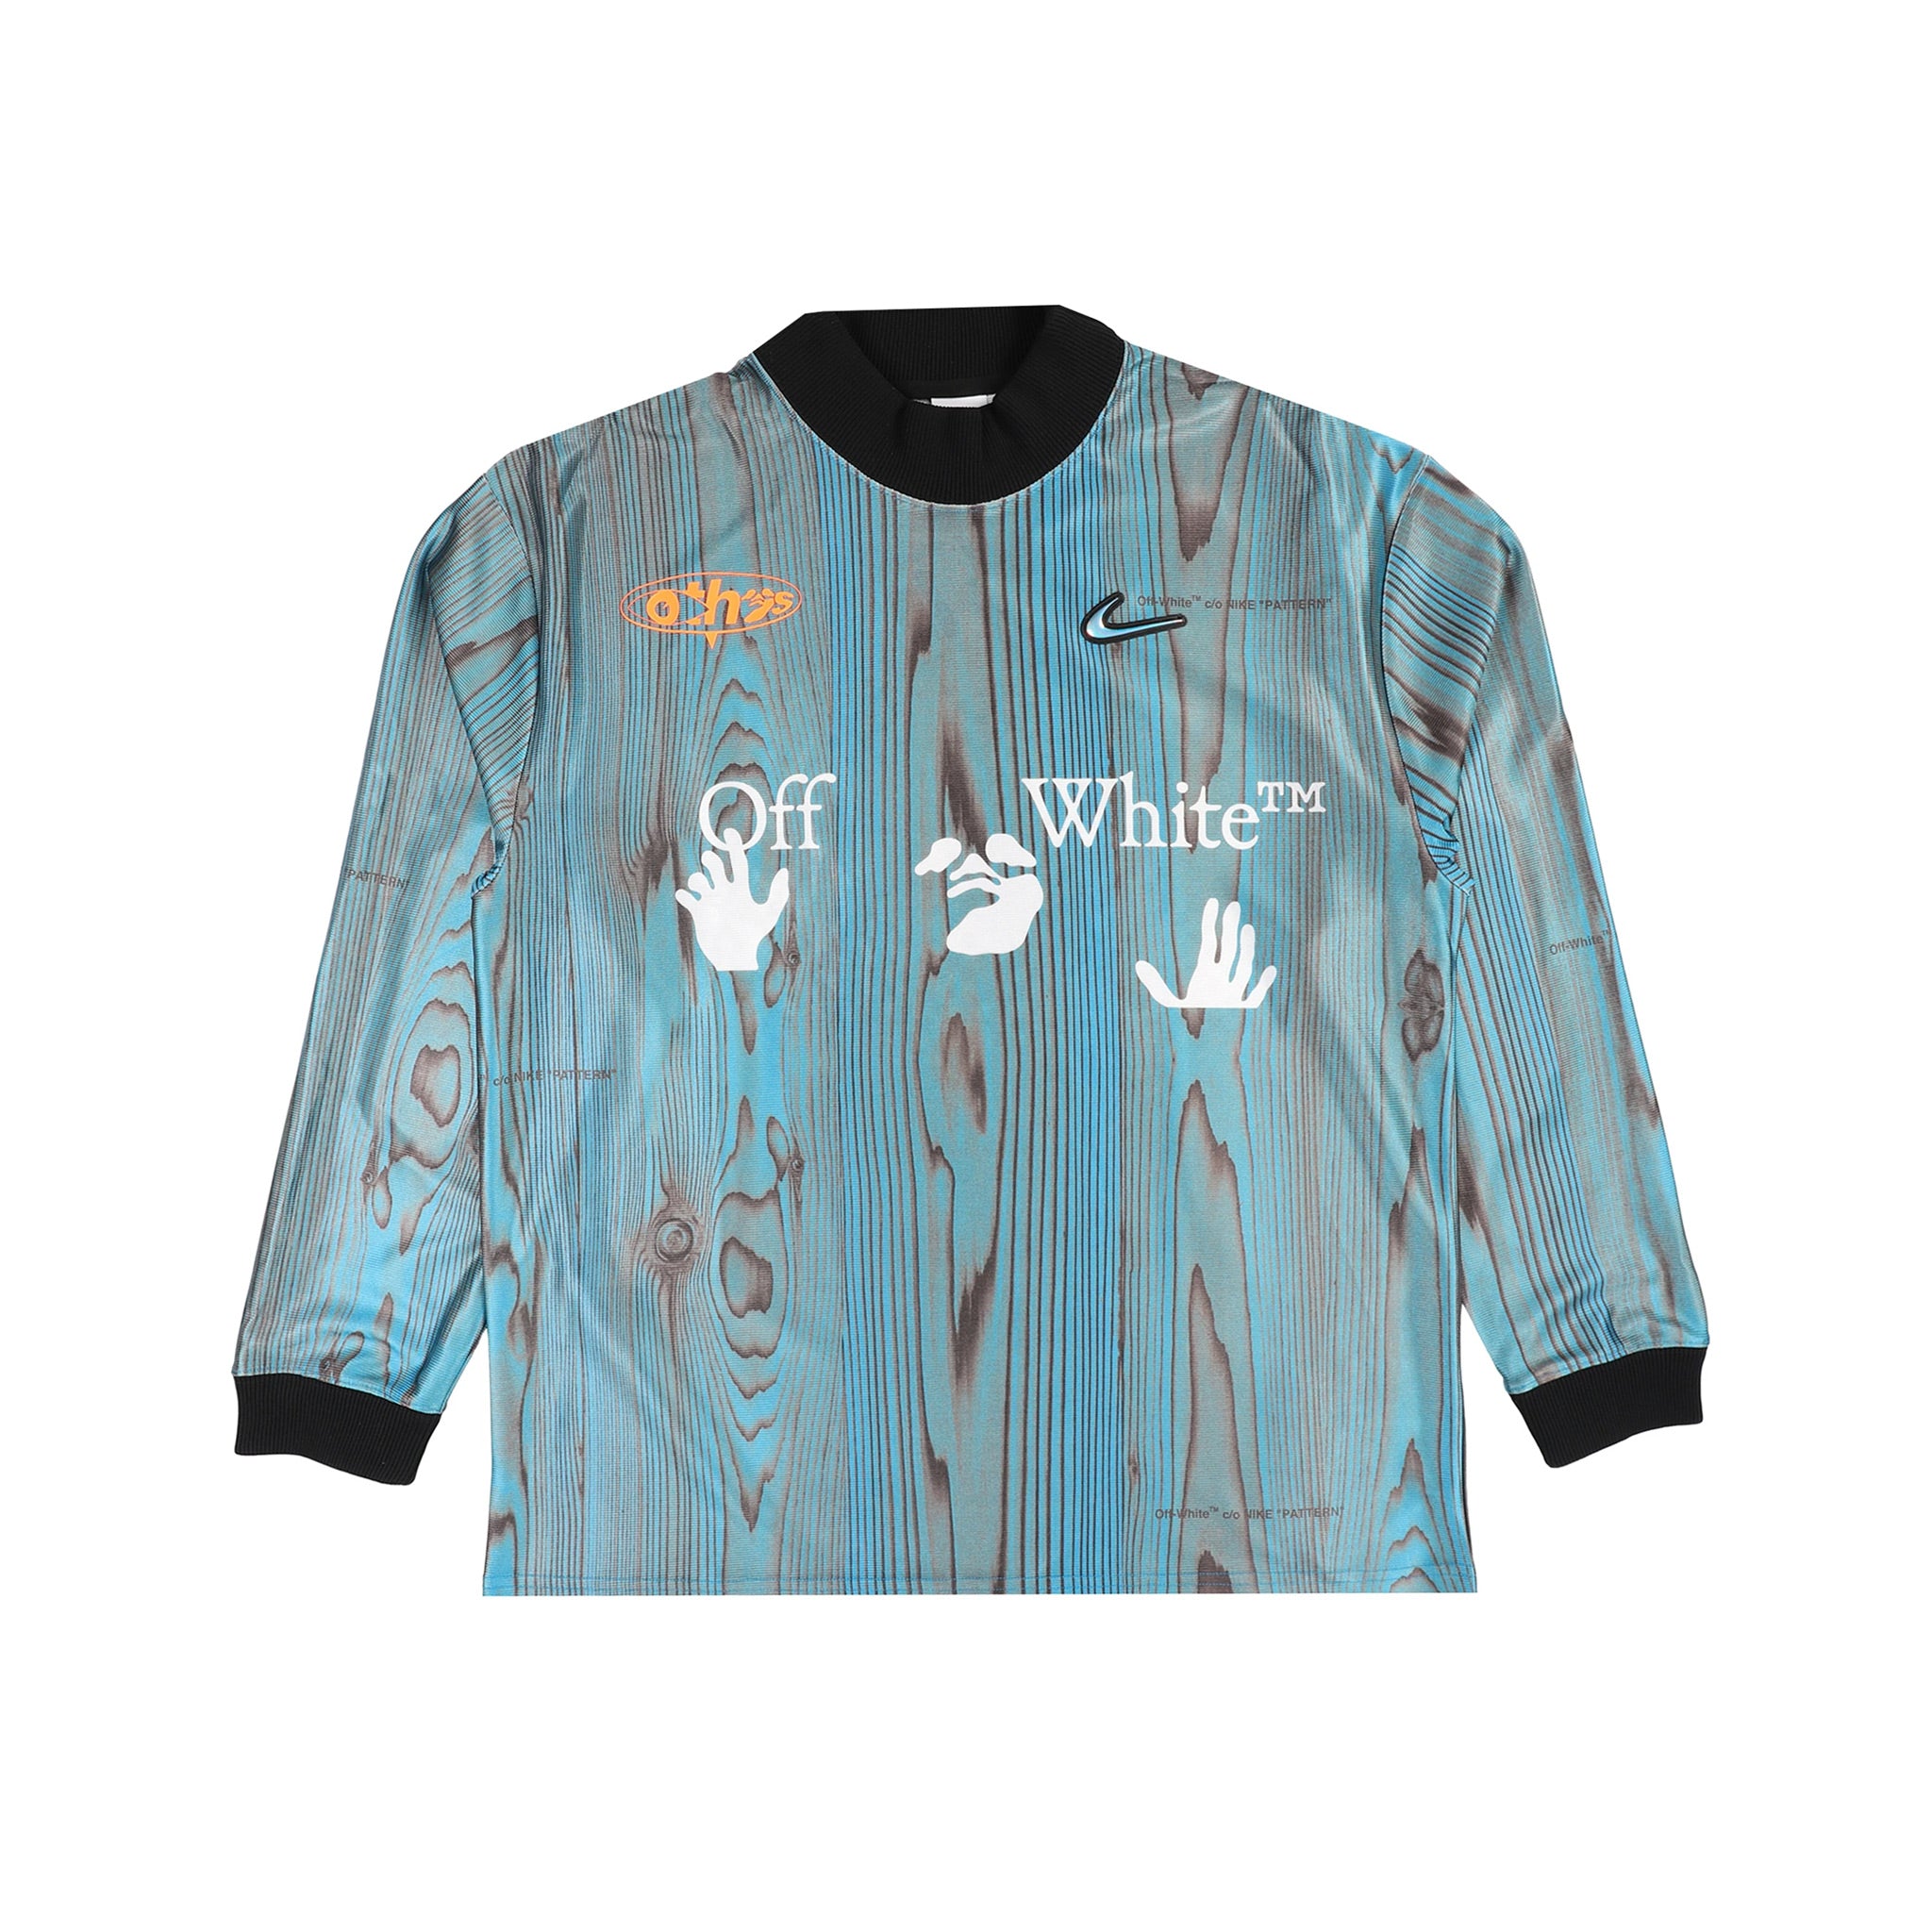 Nike x Off-White 001 Soccer Jersey - Imperial Blue FRONT | Australia New Zealand